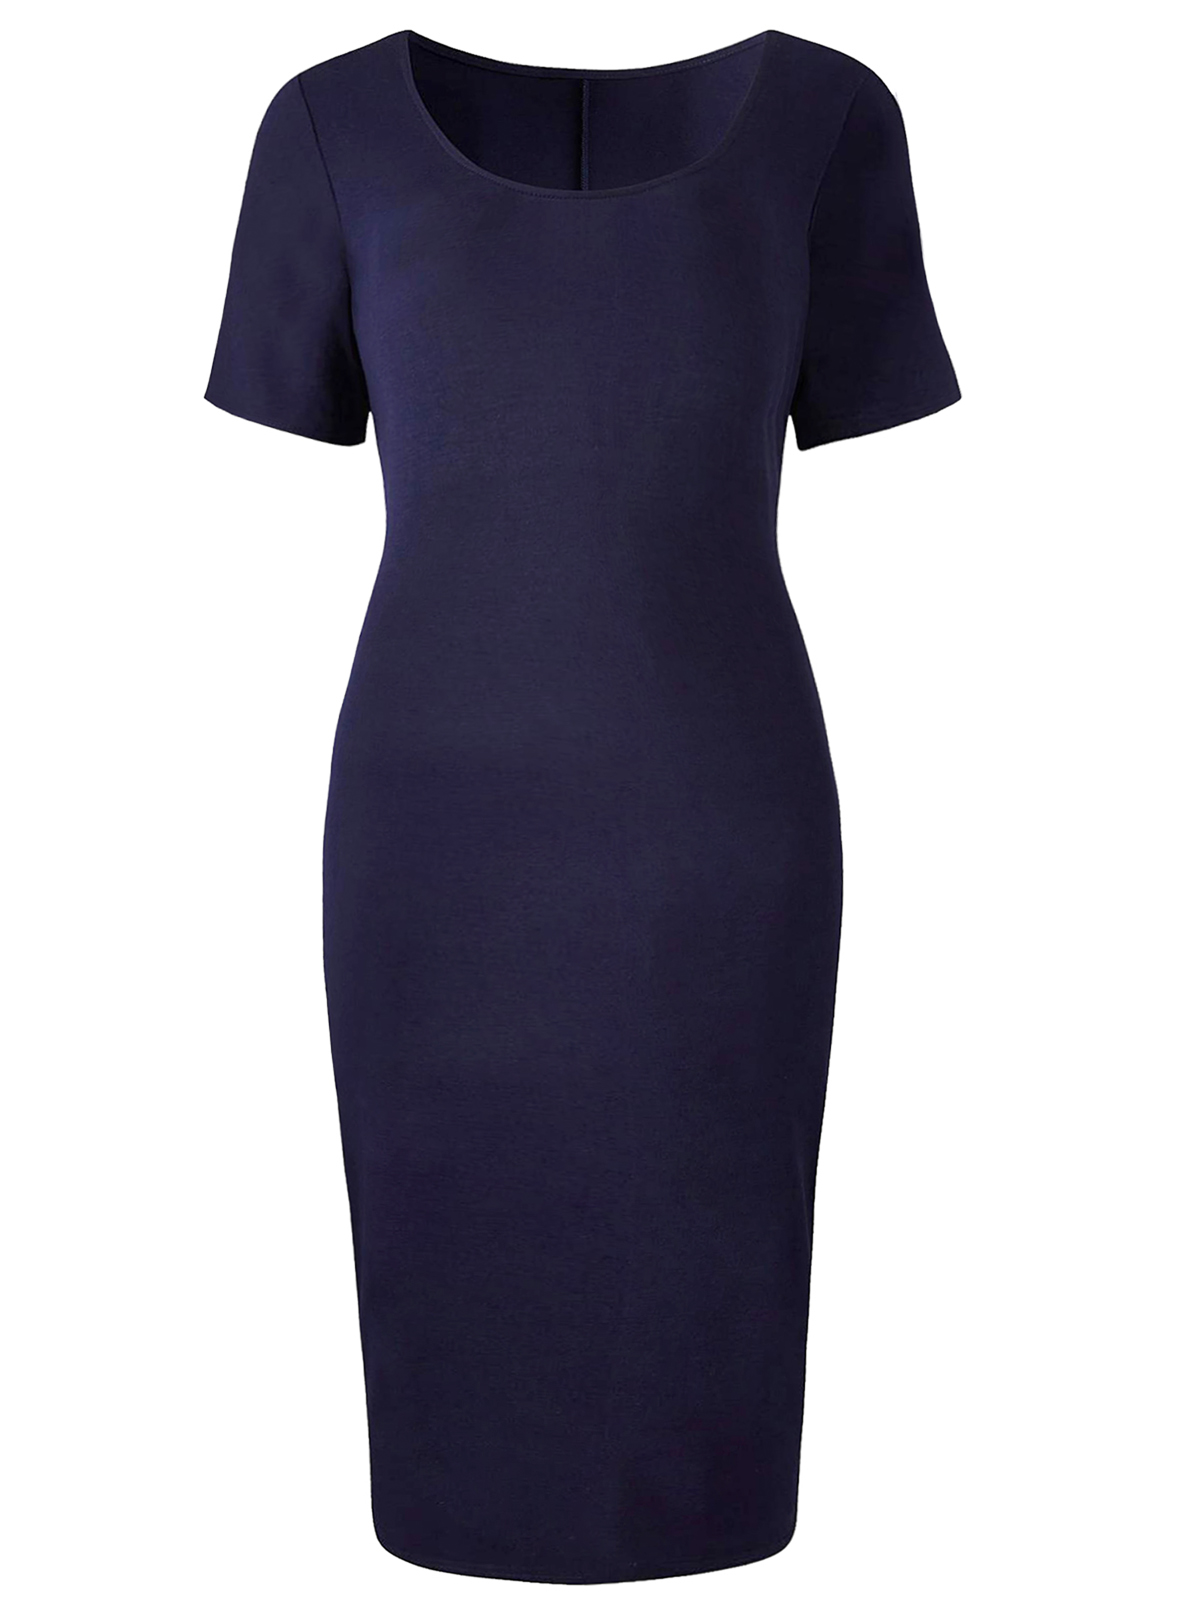 Plus Size wholesale clothing by simply be - - SimplyBe NAVY Midi ...